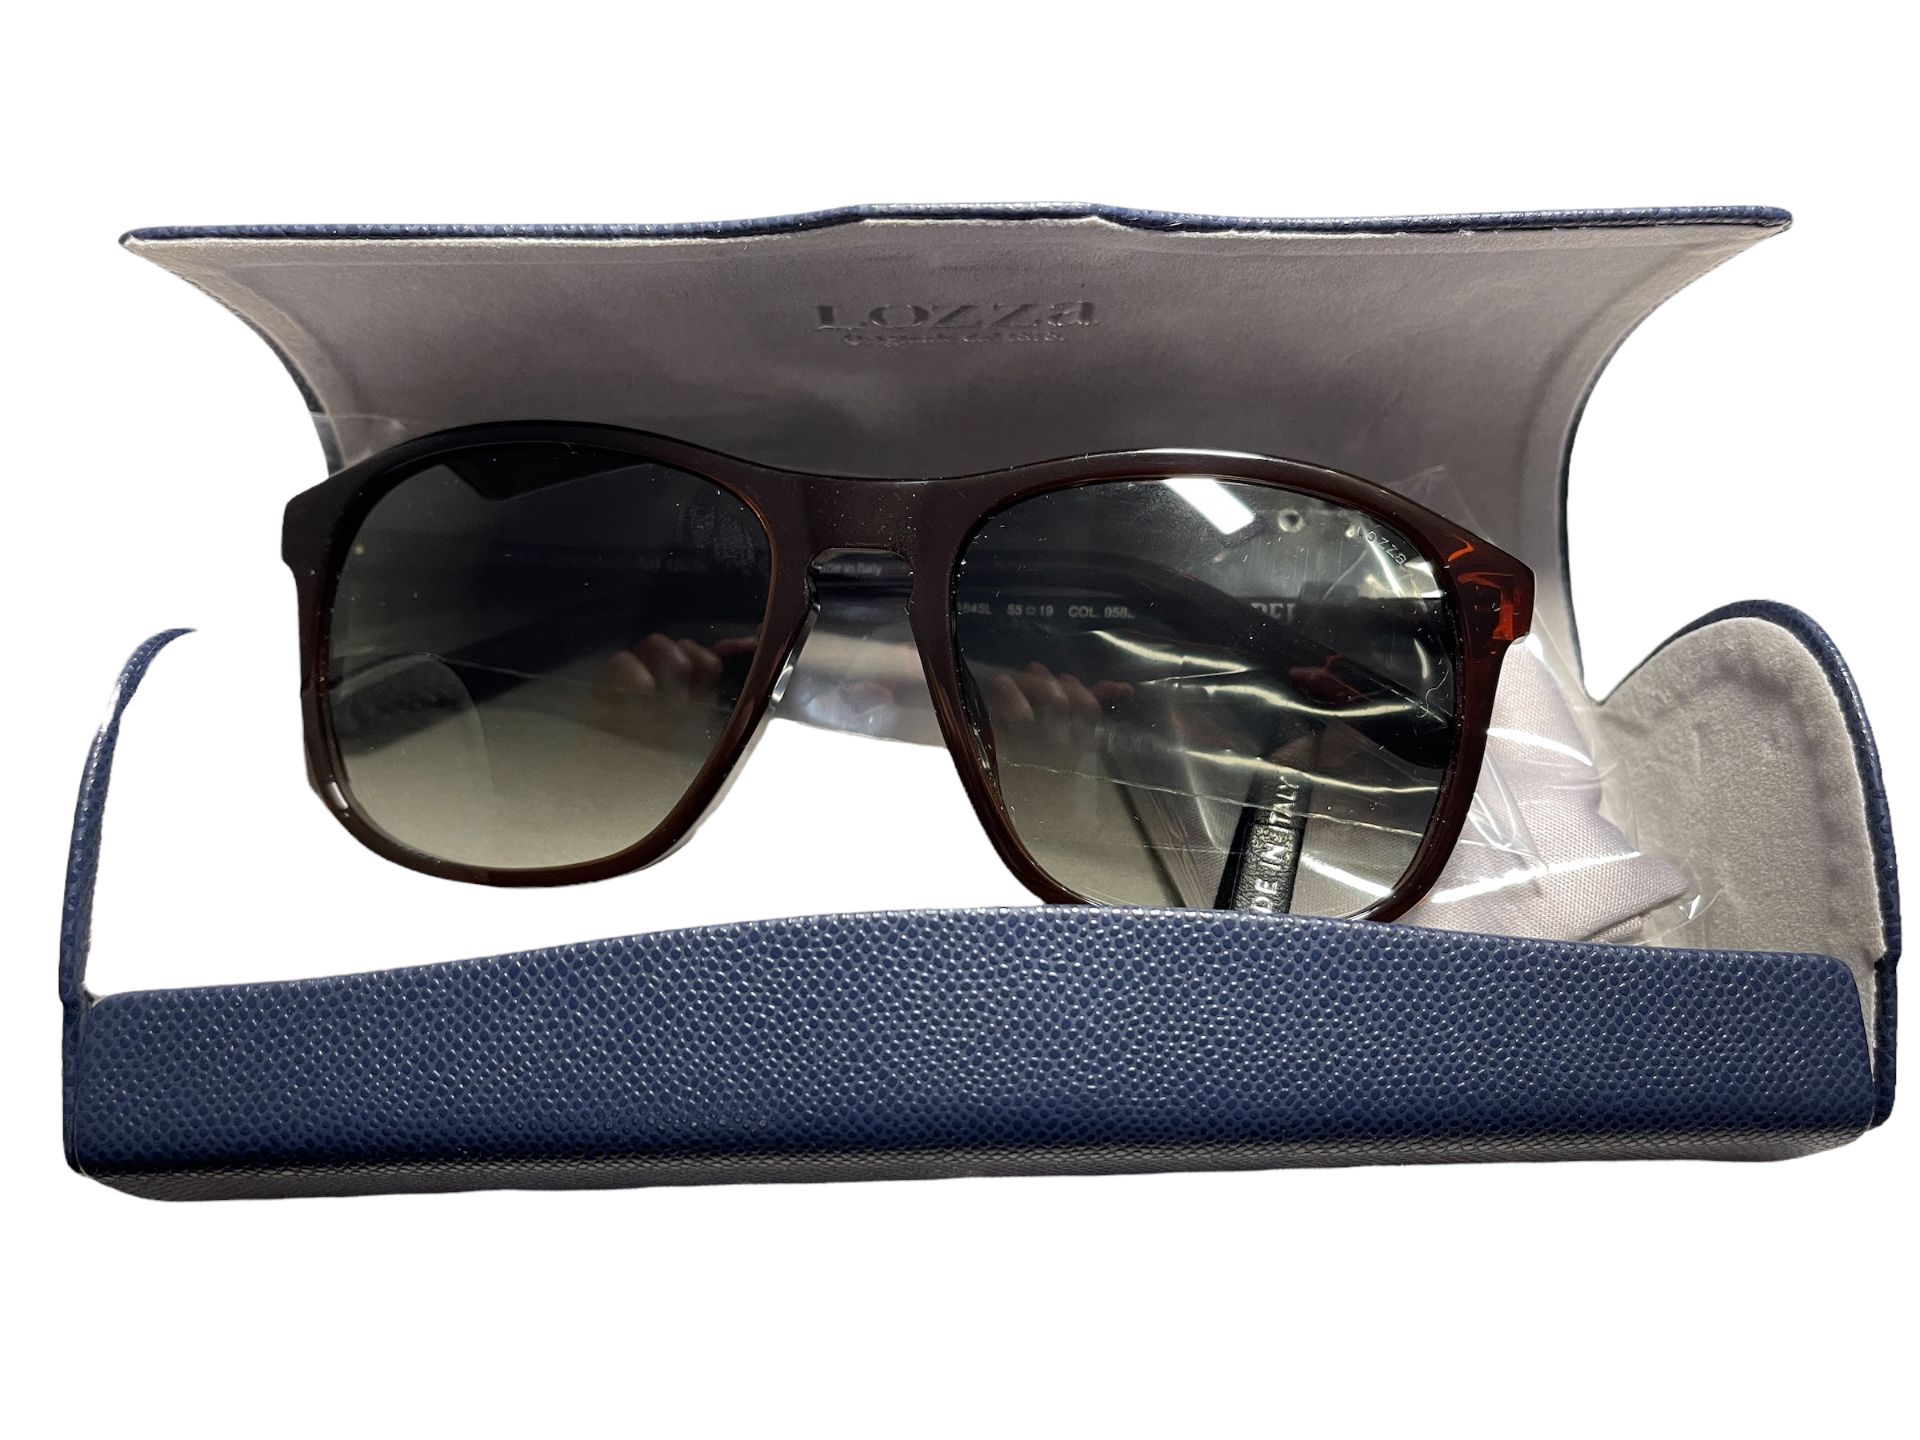 Lozza COOPER Unisex Sunglasses - Surplus Stock from our Private Jet Charter - Image 6 of 8